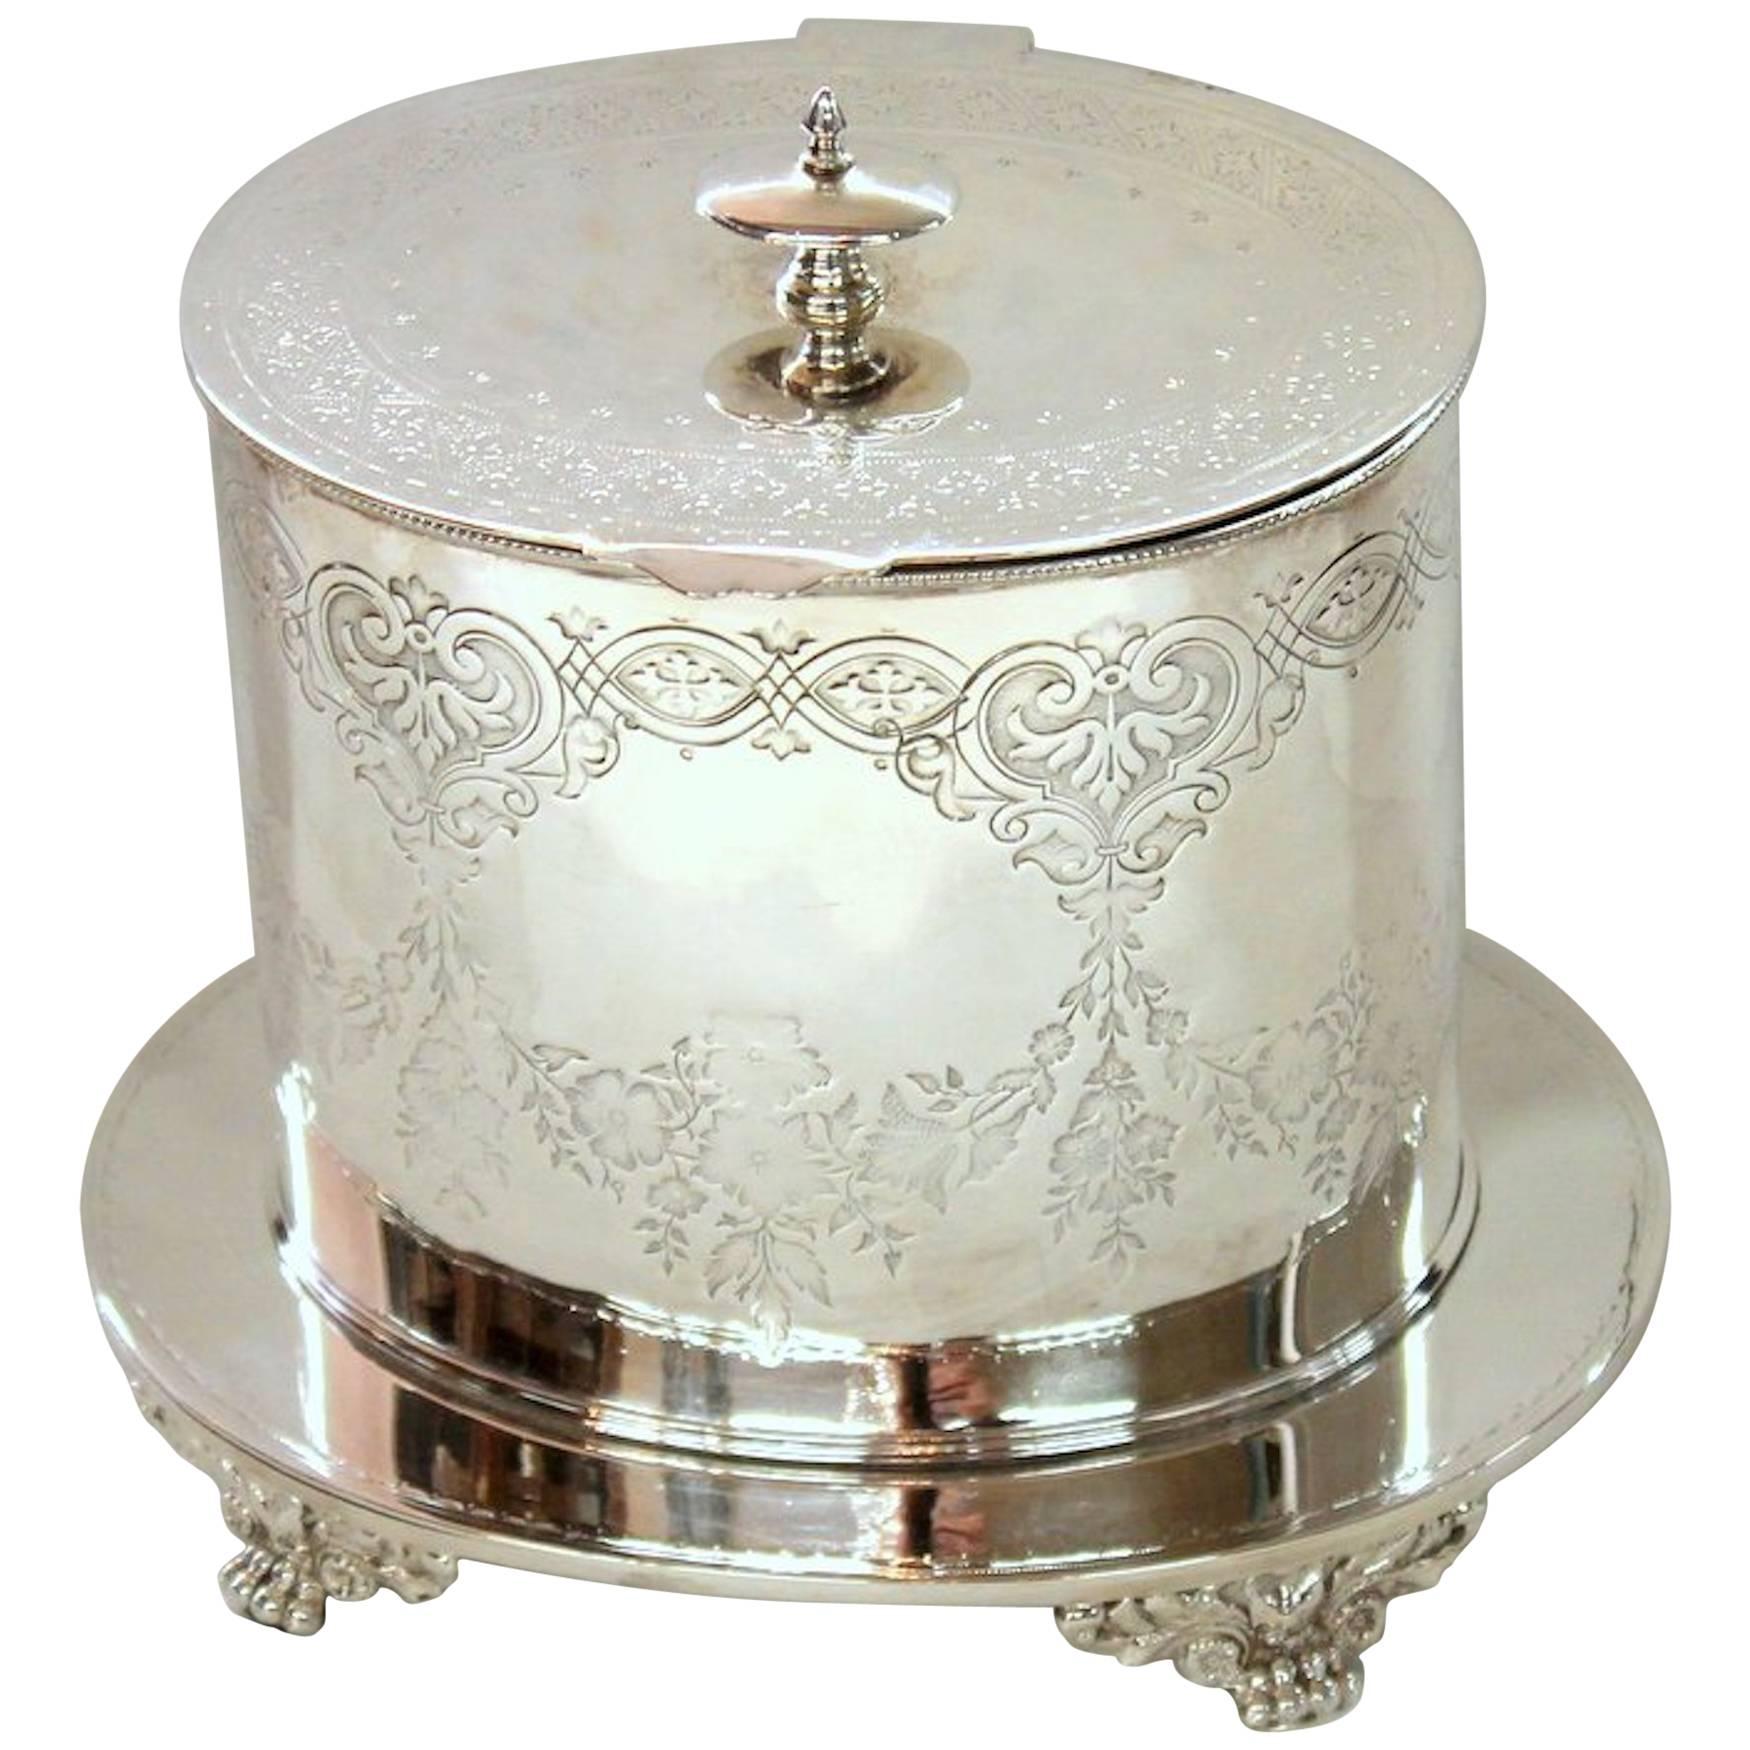 Antique English Sheffield Silver Plate Oval Biscuit Box, John Wigfall & Co.